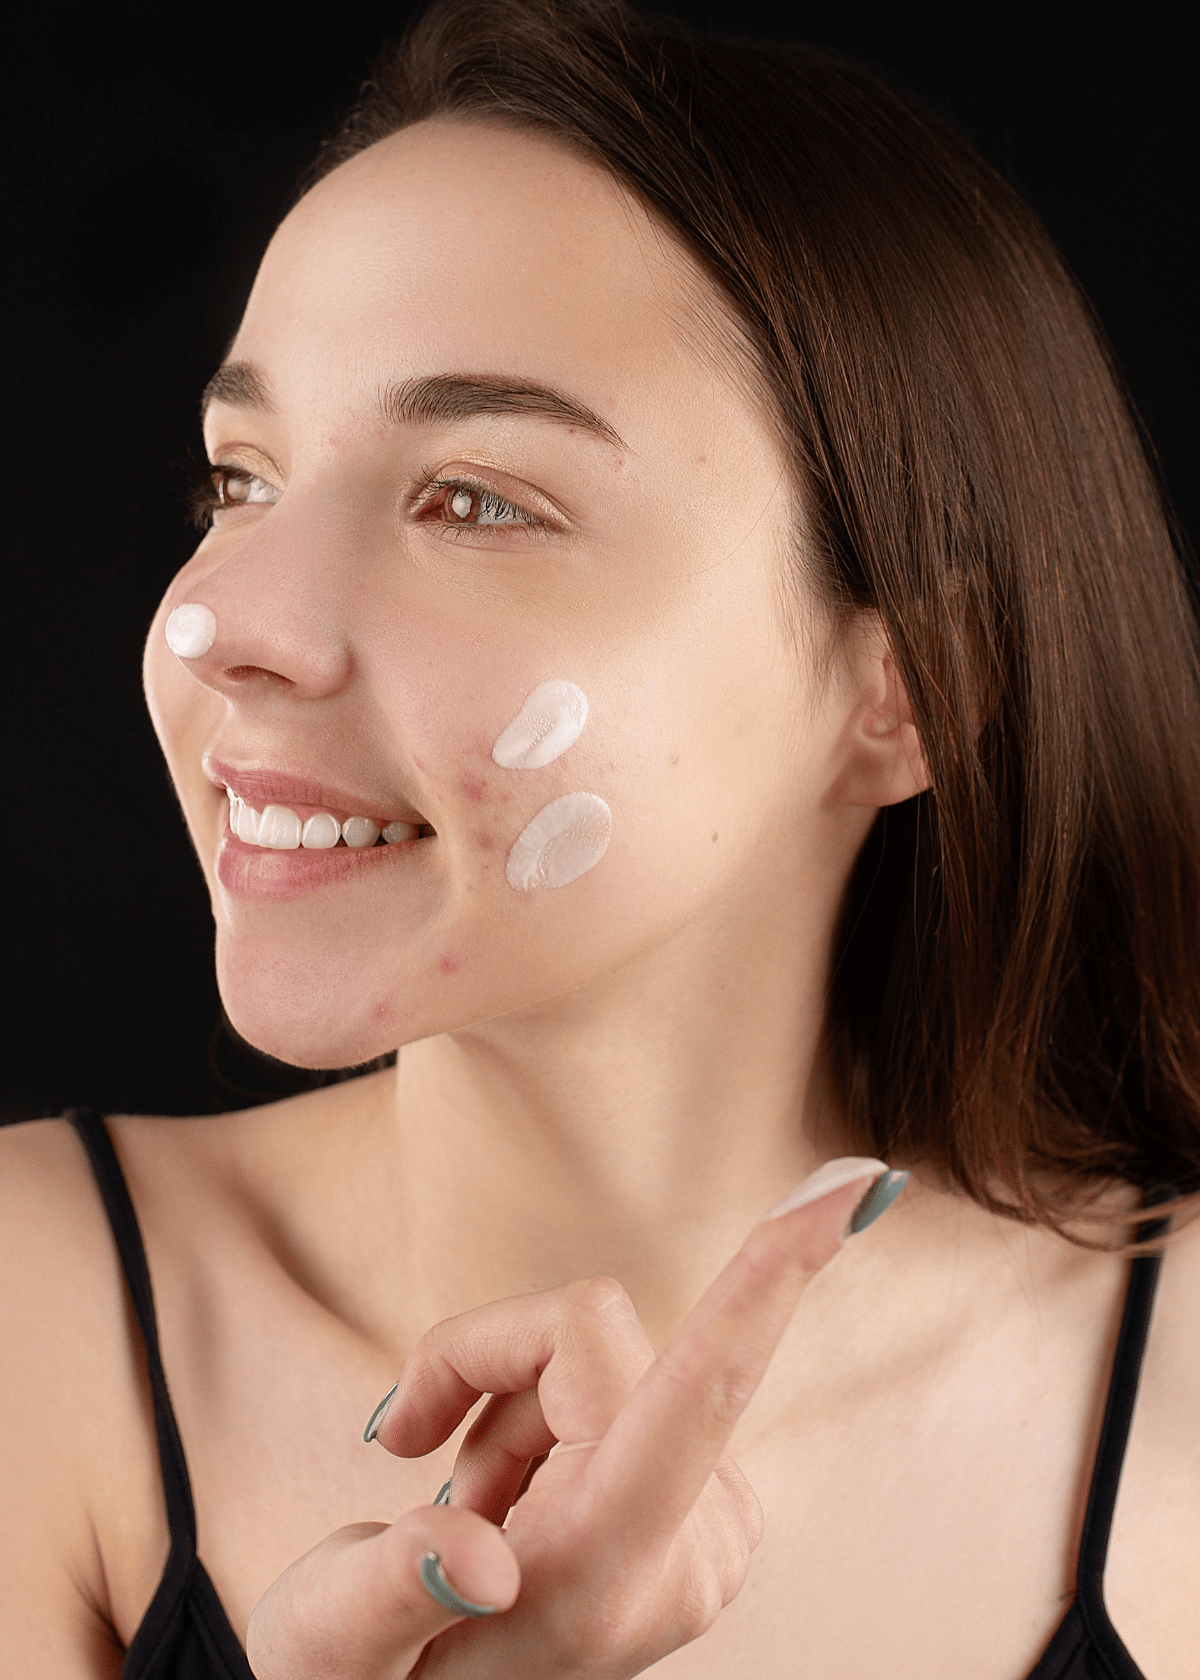 How to Apply Primer and Makeup to Acne Scars